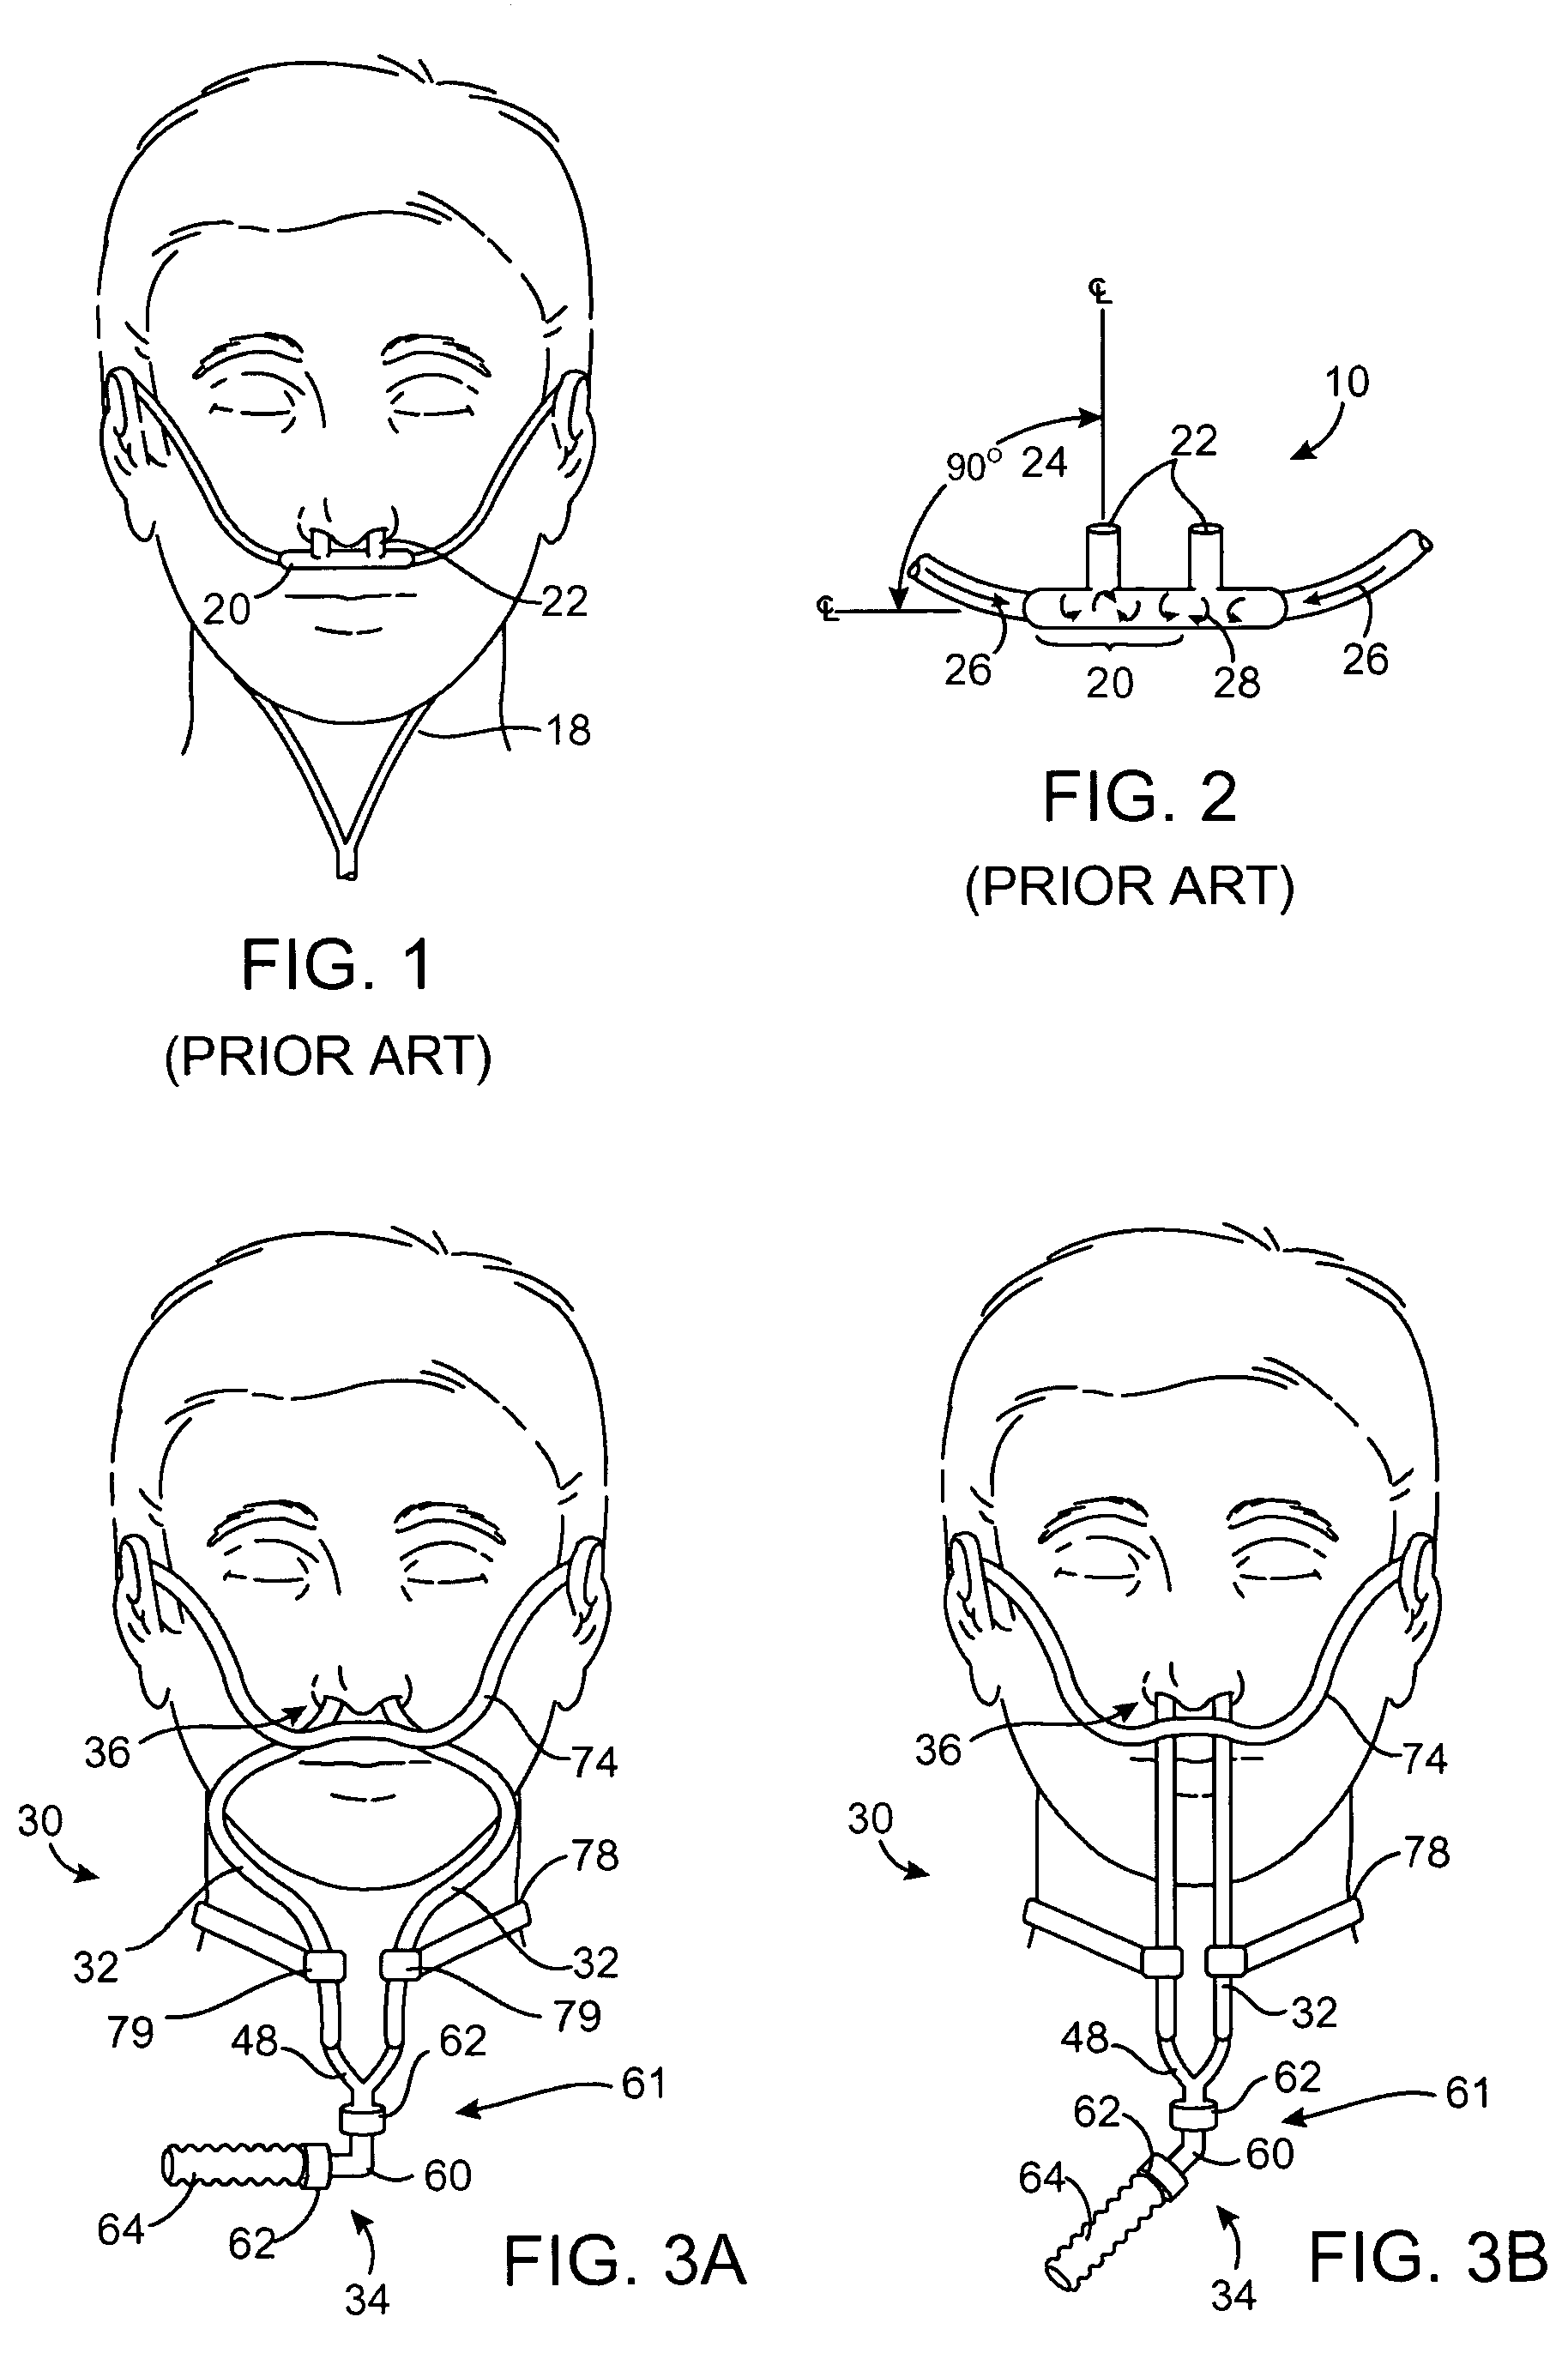 Method and device for non-invasive ventilation with nasal interface